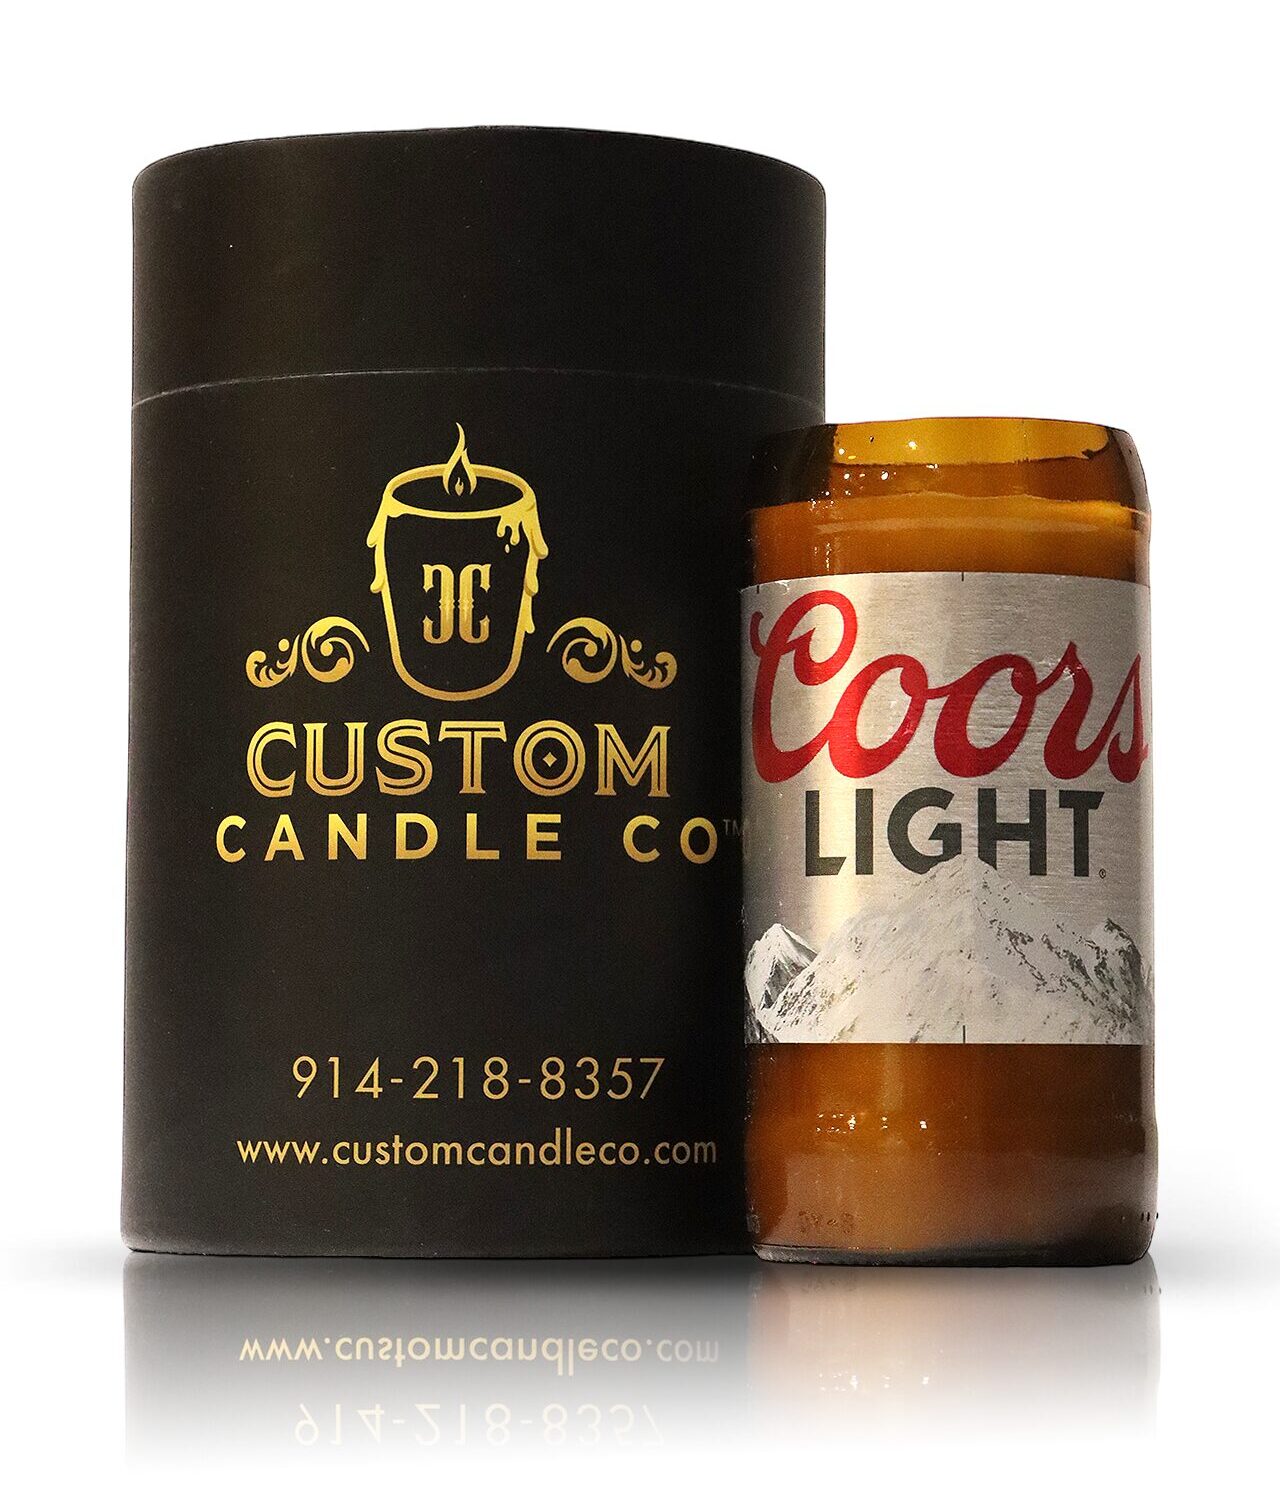 Recycled Coors Light Can Candle Co. offers custom candles inspired by the refreshing taste of Coors Light beer.